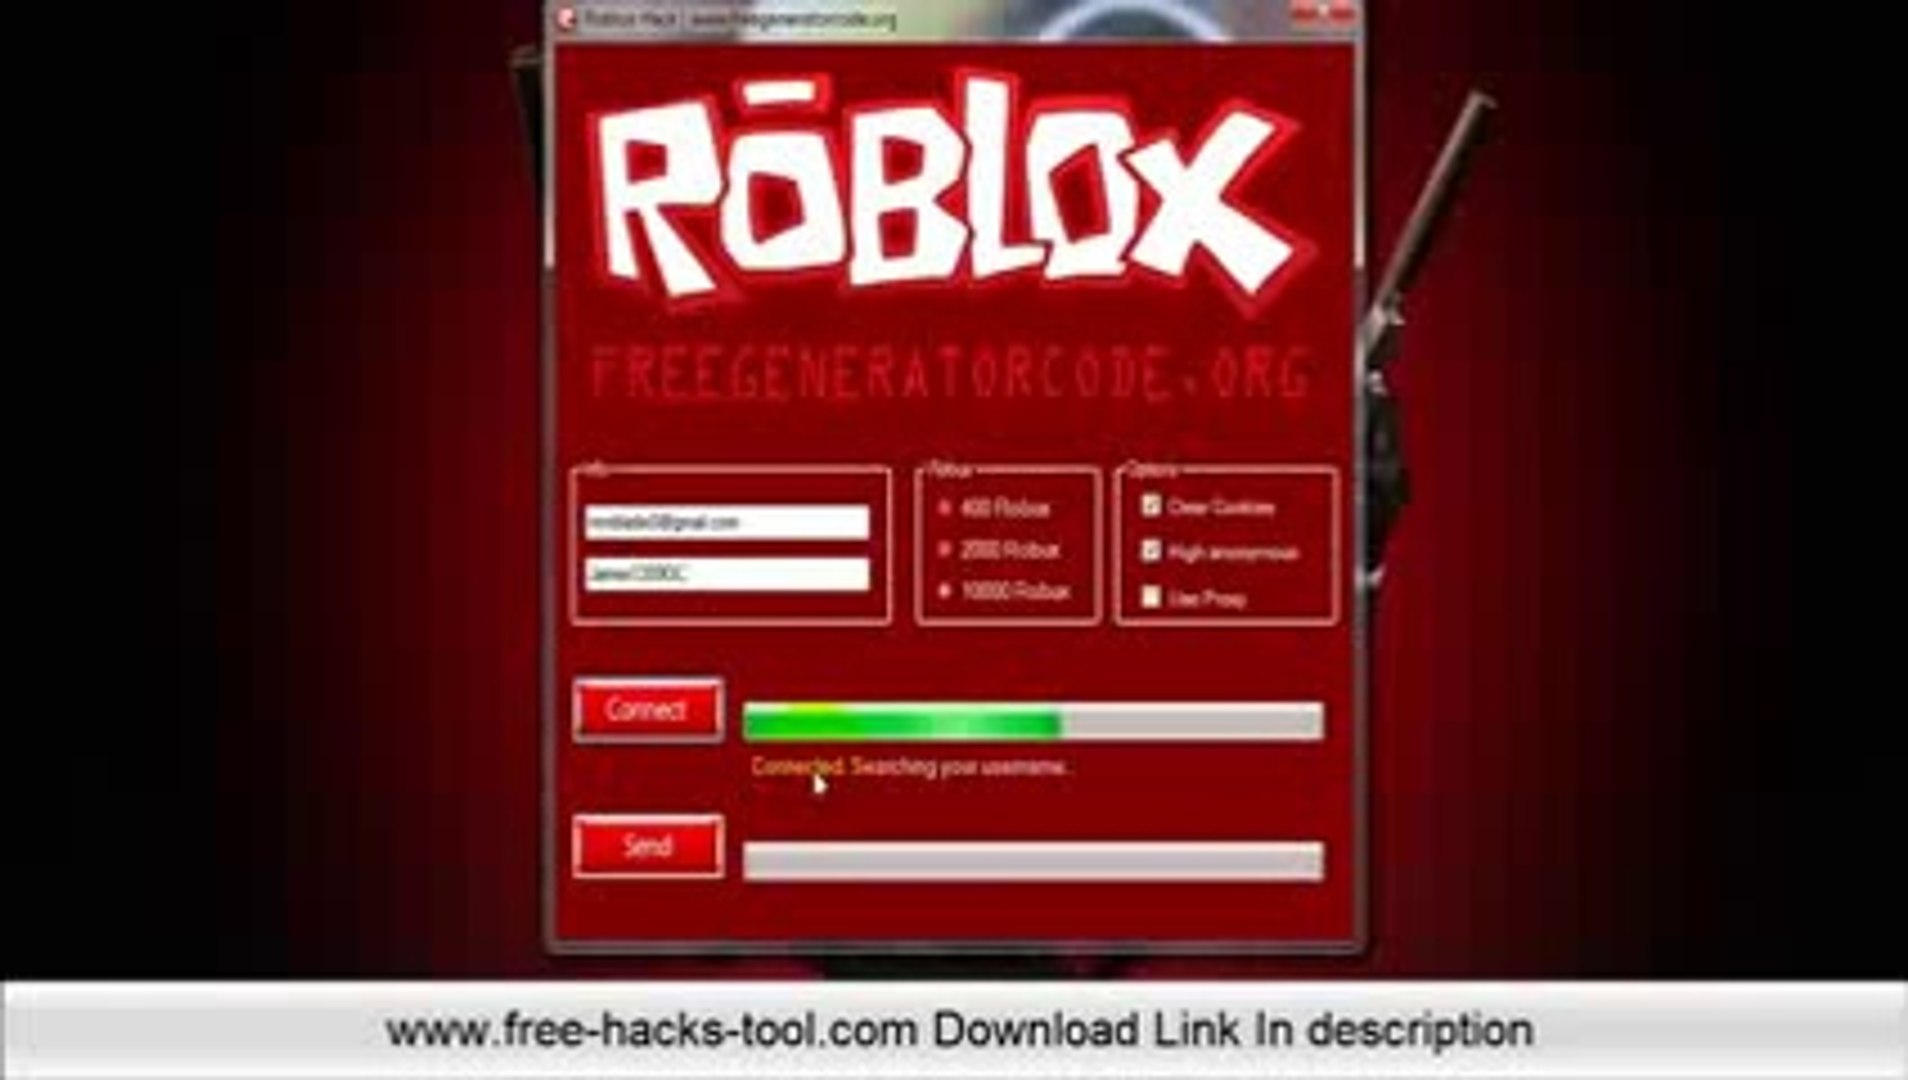 How To Download Roblox Hack Tool